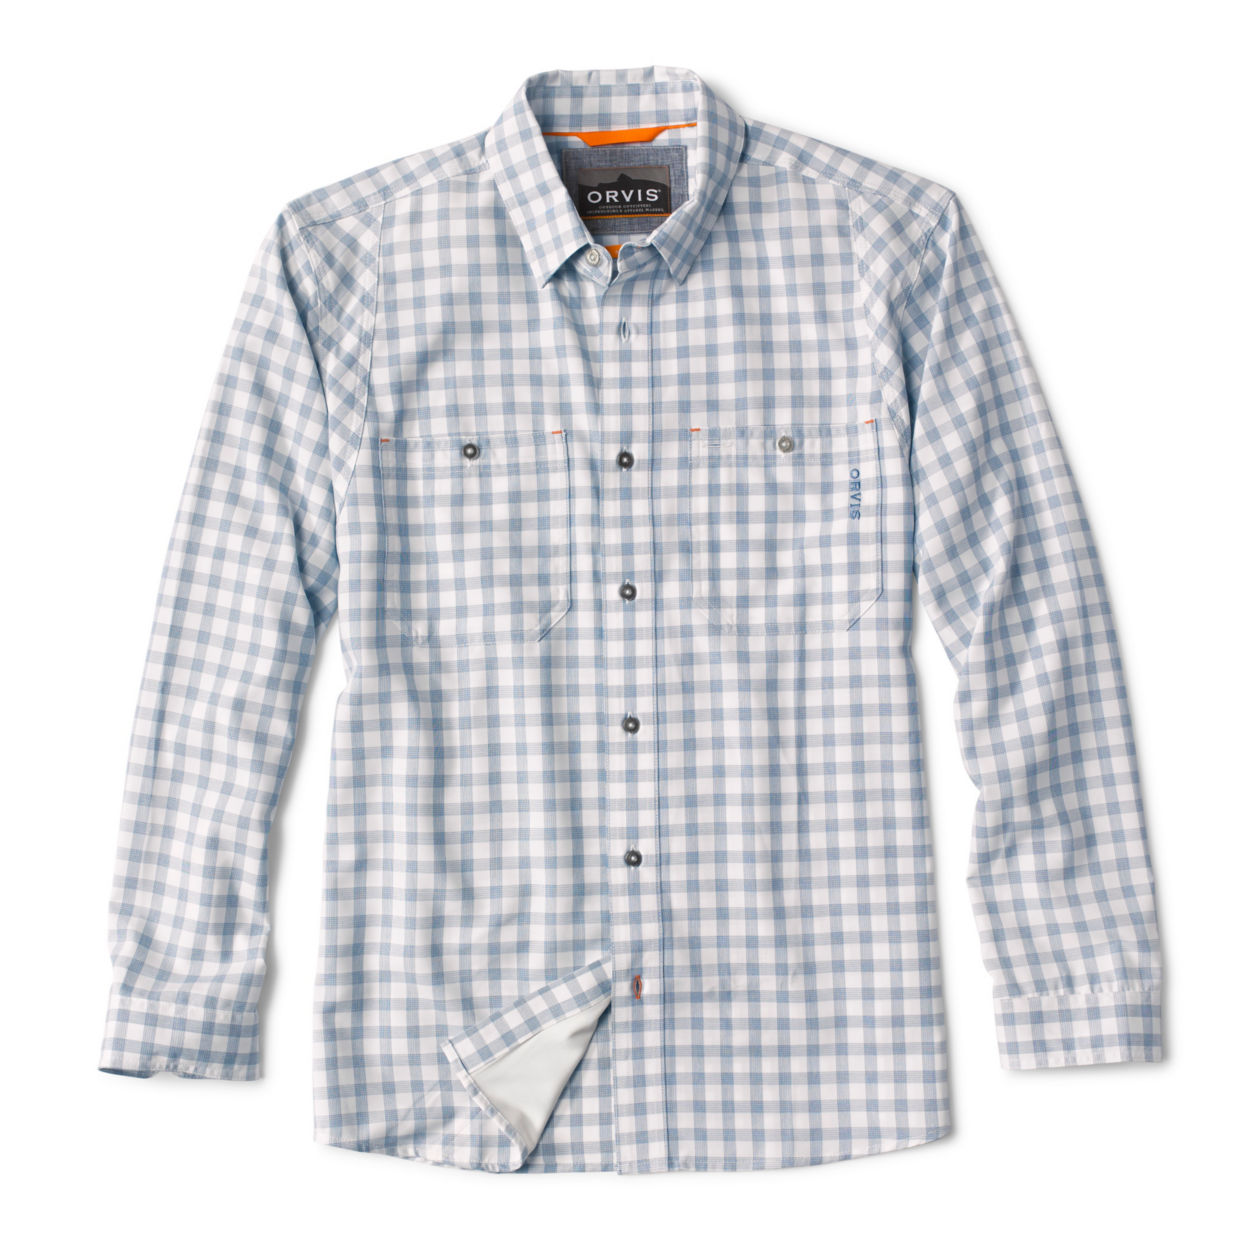 Men's Tech Chambray Performance Work Shirt Dusty Blue Plaid Size 2XL Polyester/Recycled Materials Orvis